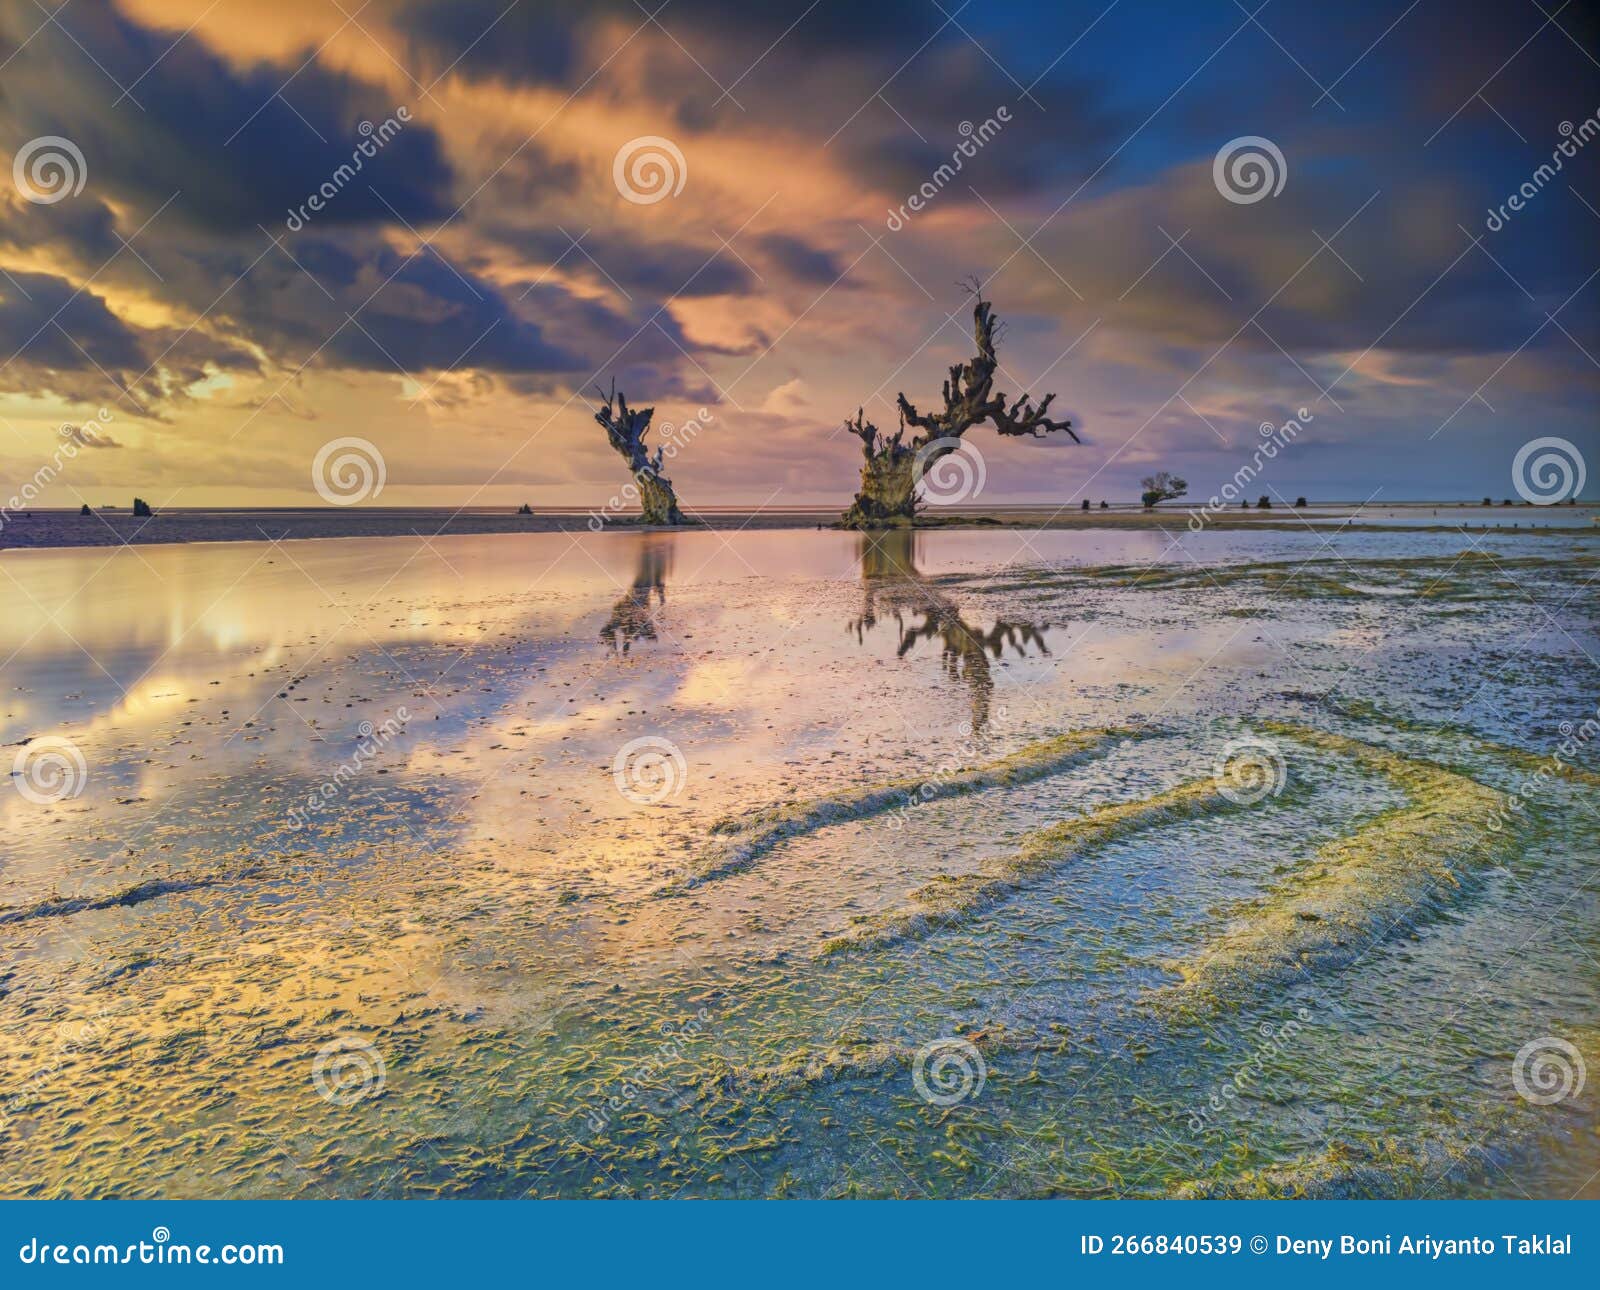 sunset on the beach with dried tree objects